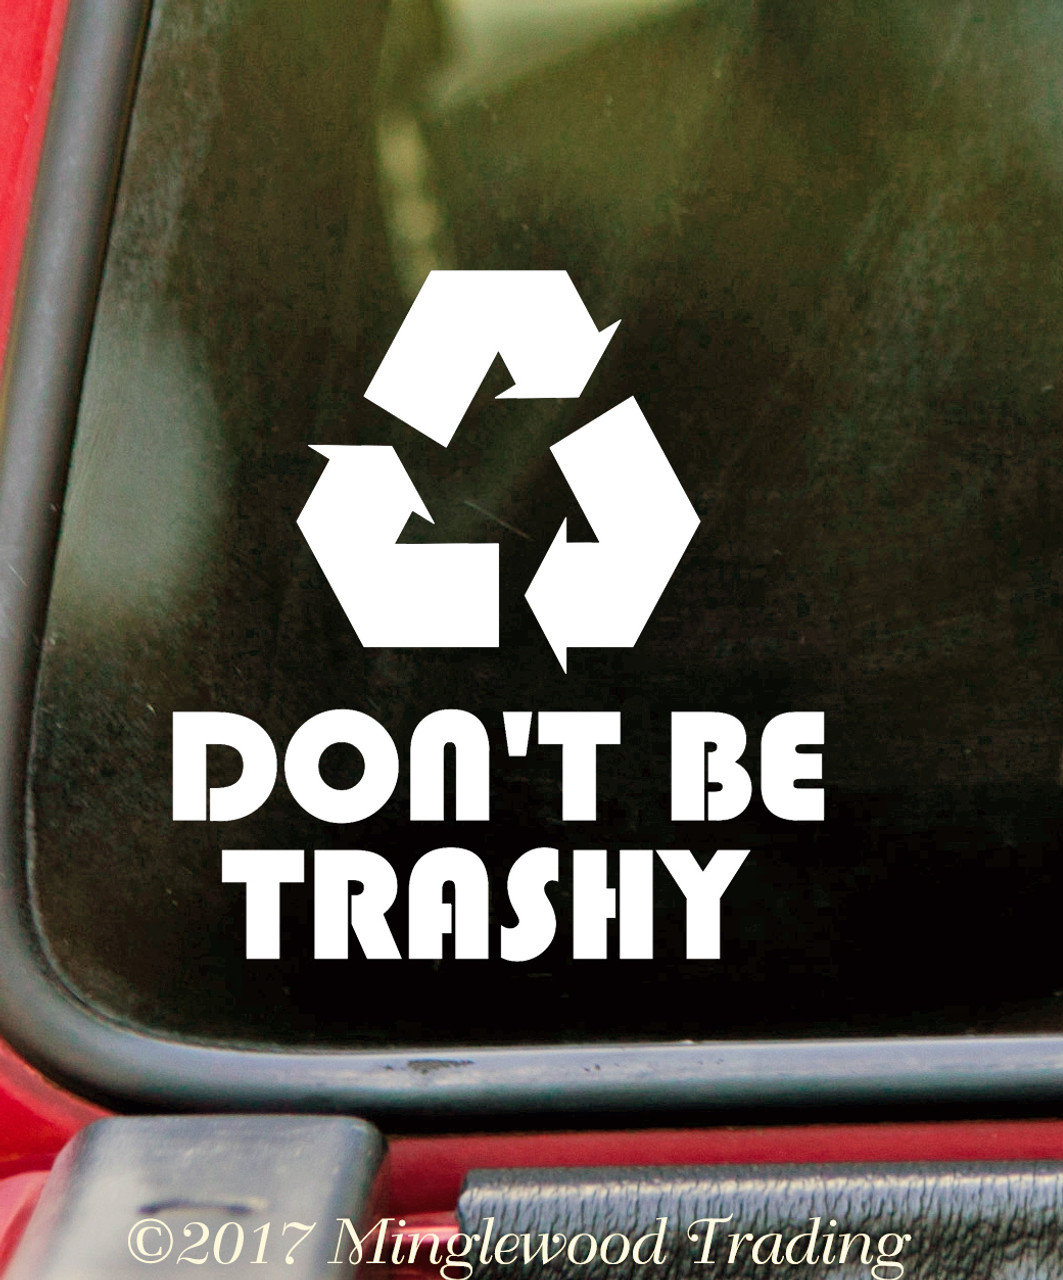 DON'T BE TRASHY 5" x 5" Vinyl Decal Sticker - Recycle